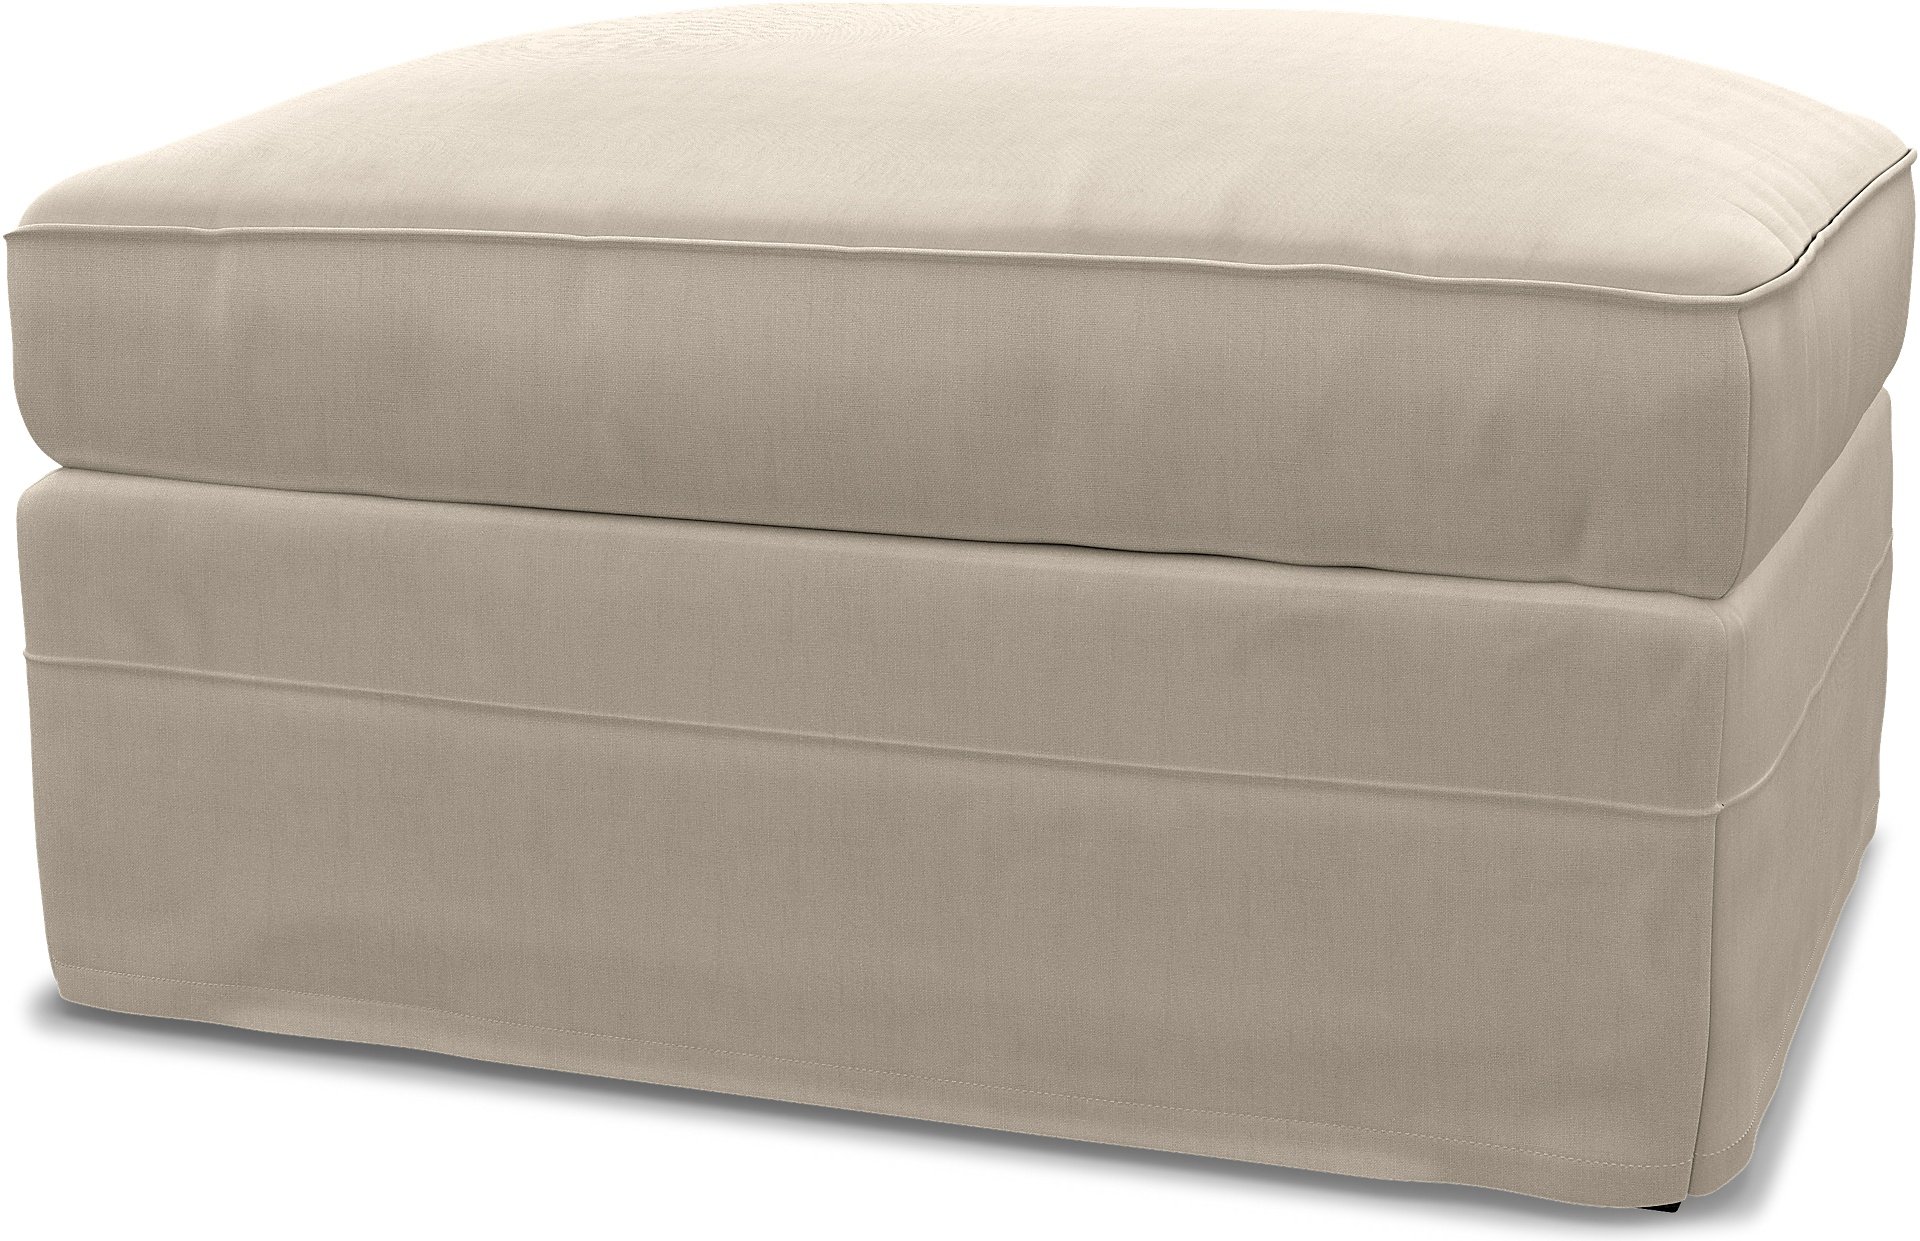 IKEA - Gronlid Footstool with Storage Cover, Parchment, Linen - Bemz